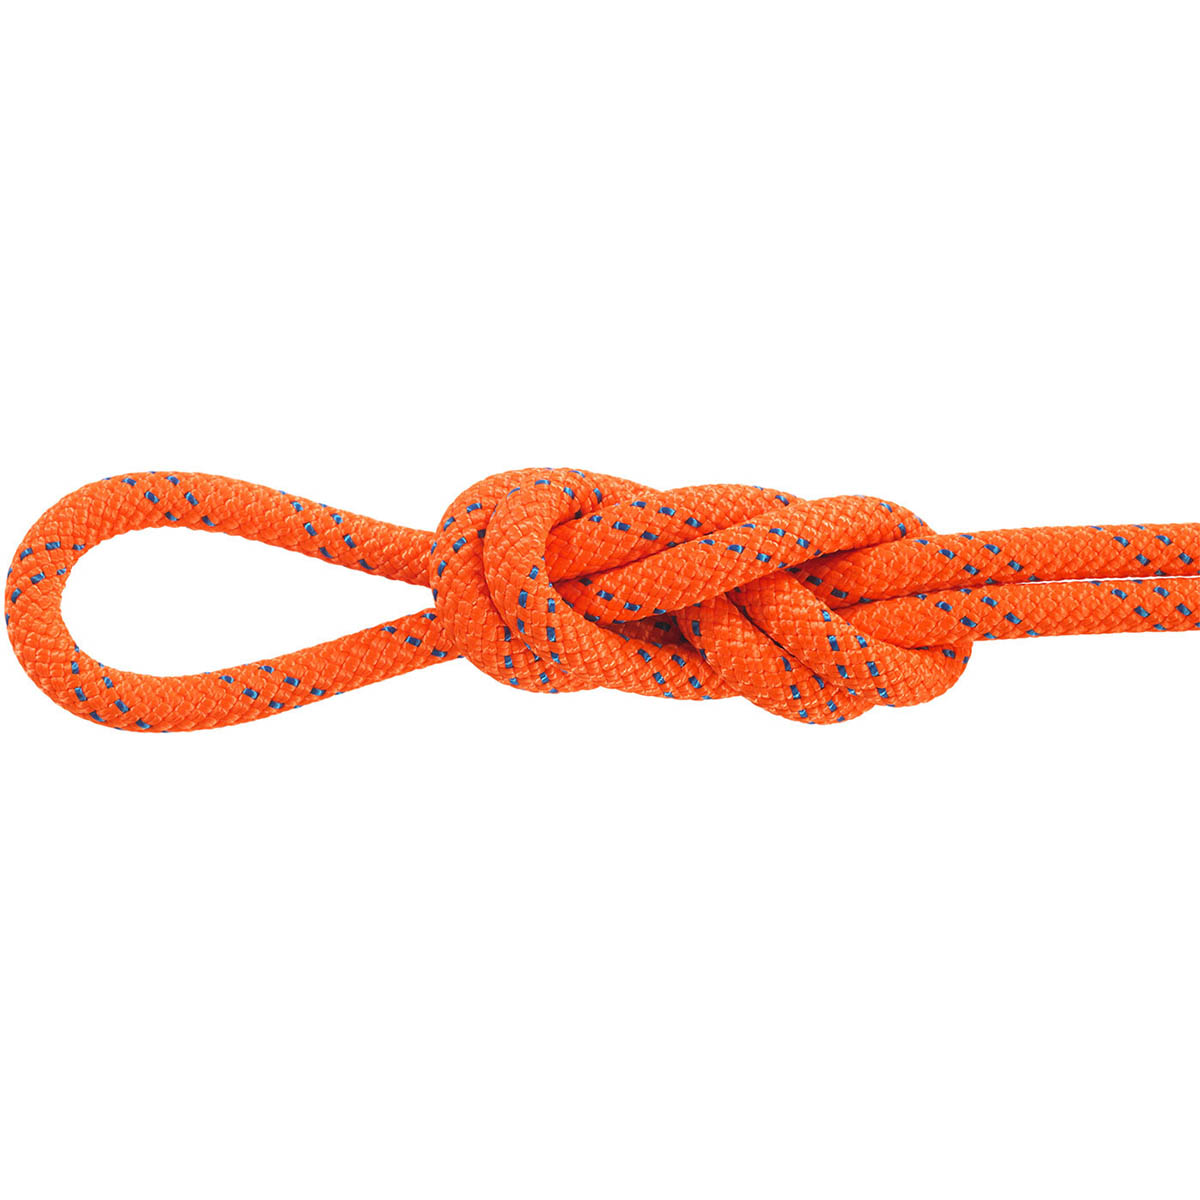 UTILITY ROPE, STATIC, 7 MM, TAN W RED TRACER, Sold by the linear foot